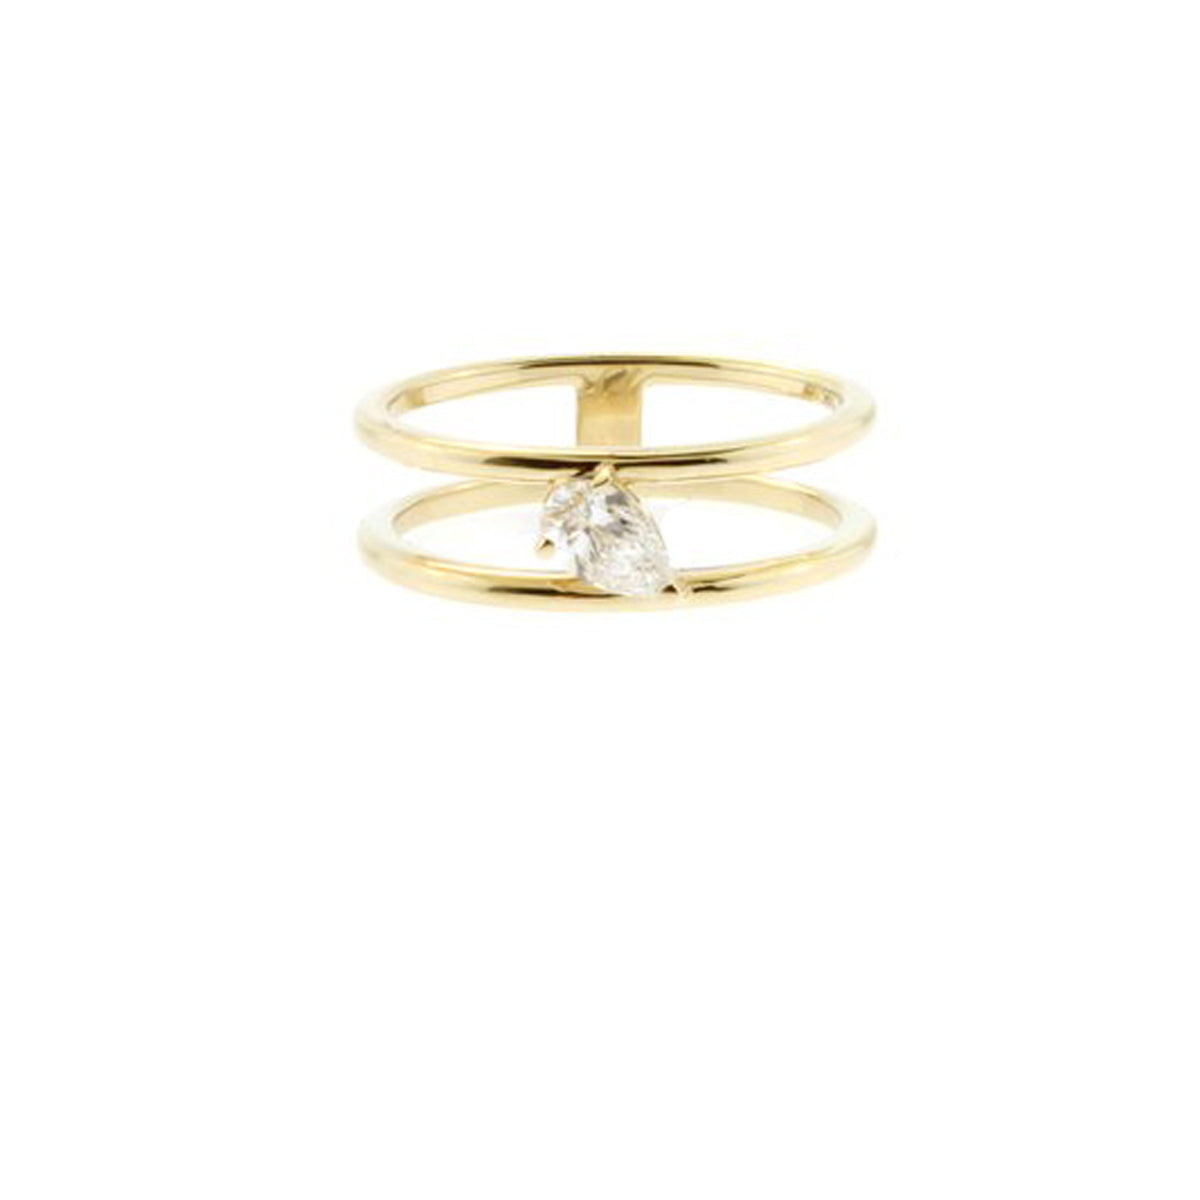 Double Band Pear Diamond Ring